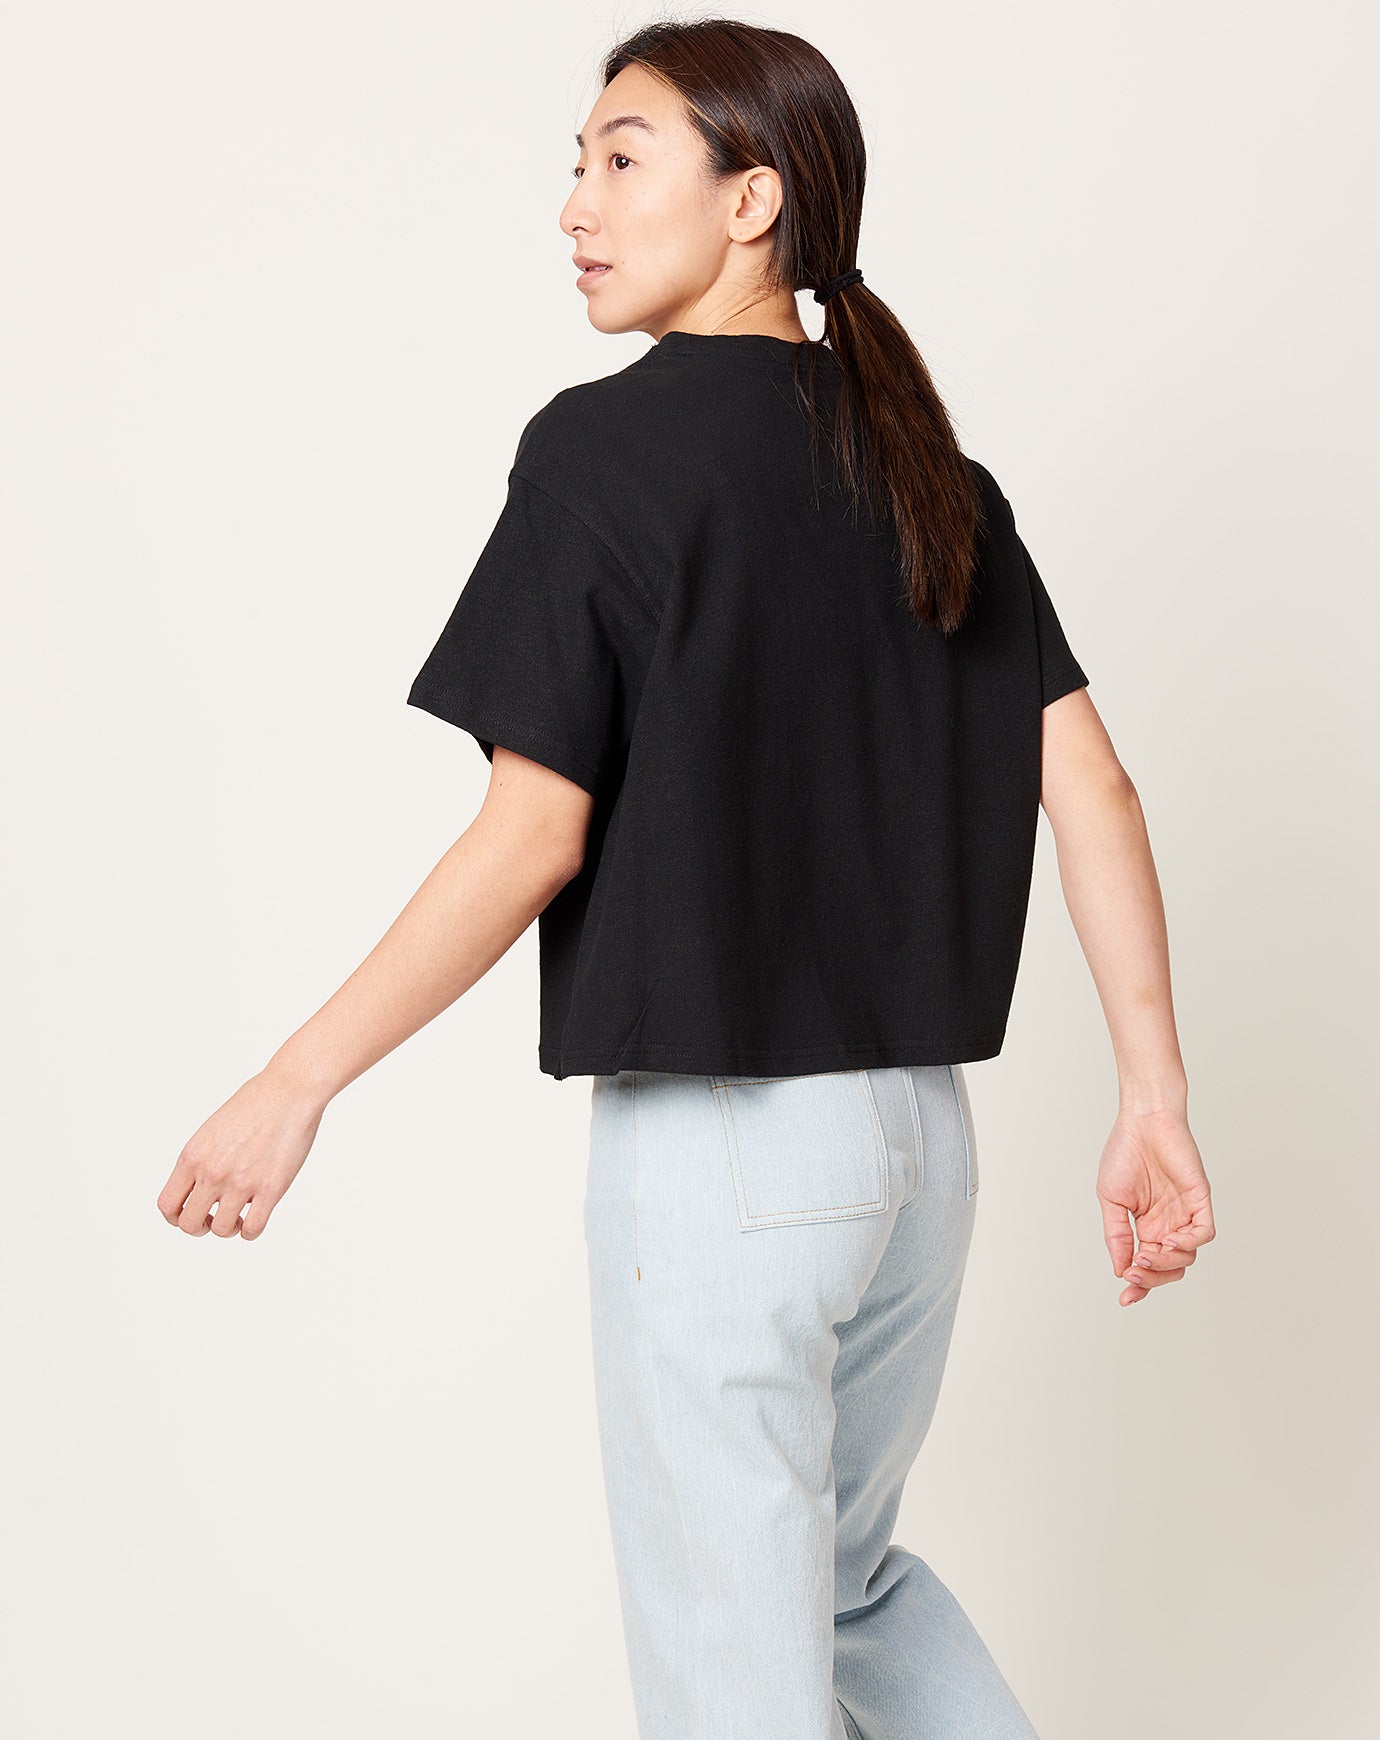 7115 by Szeki Signature Cropped Tee in Black